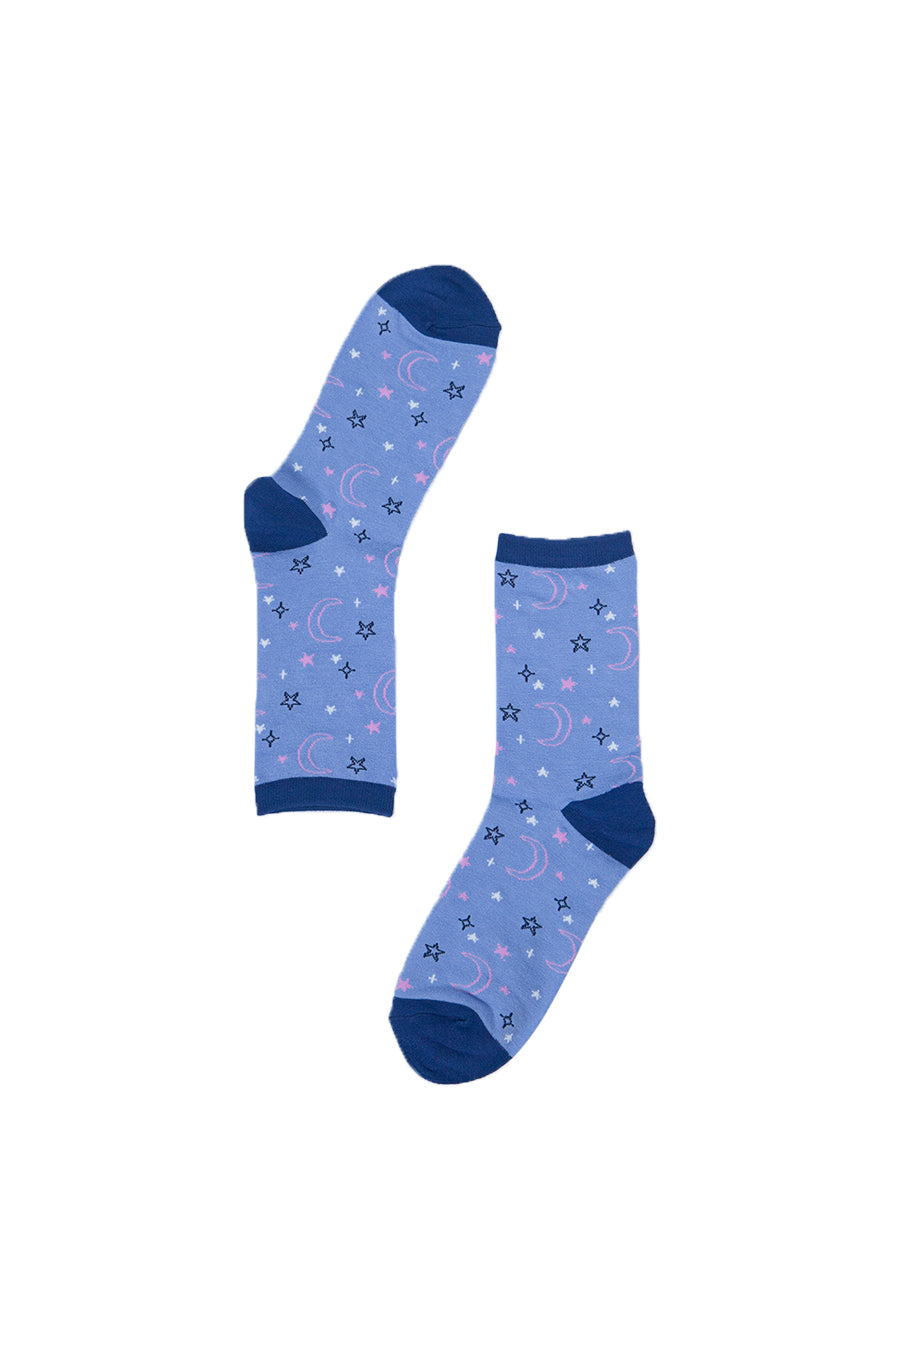 lilac ankle socks with an all over star and moon print